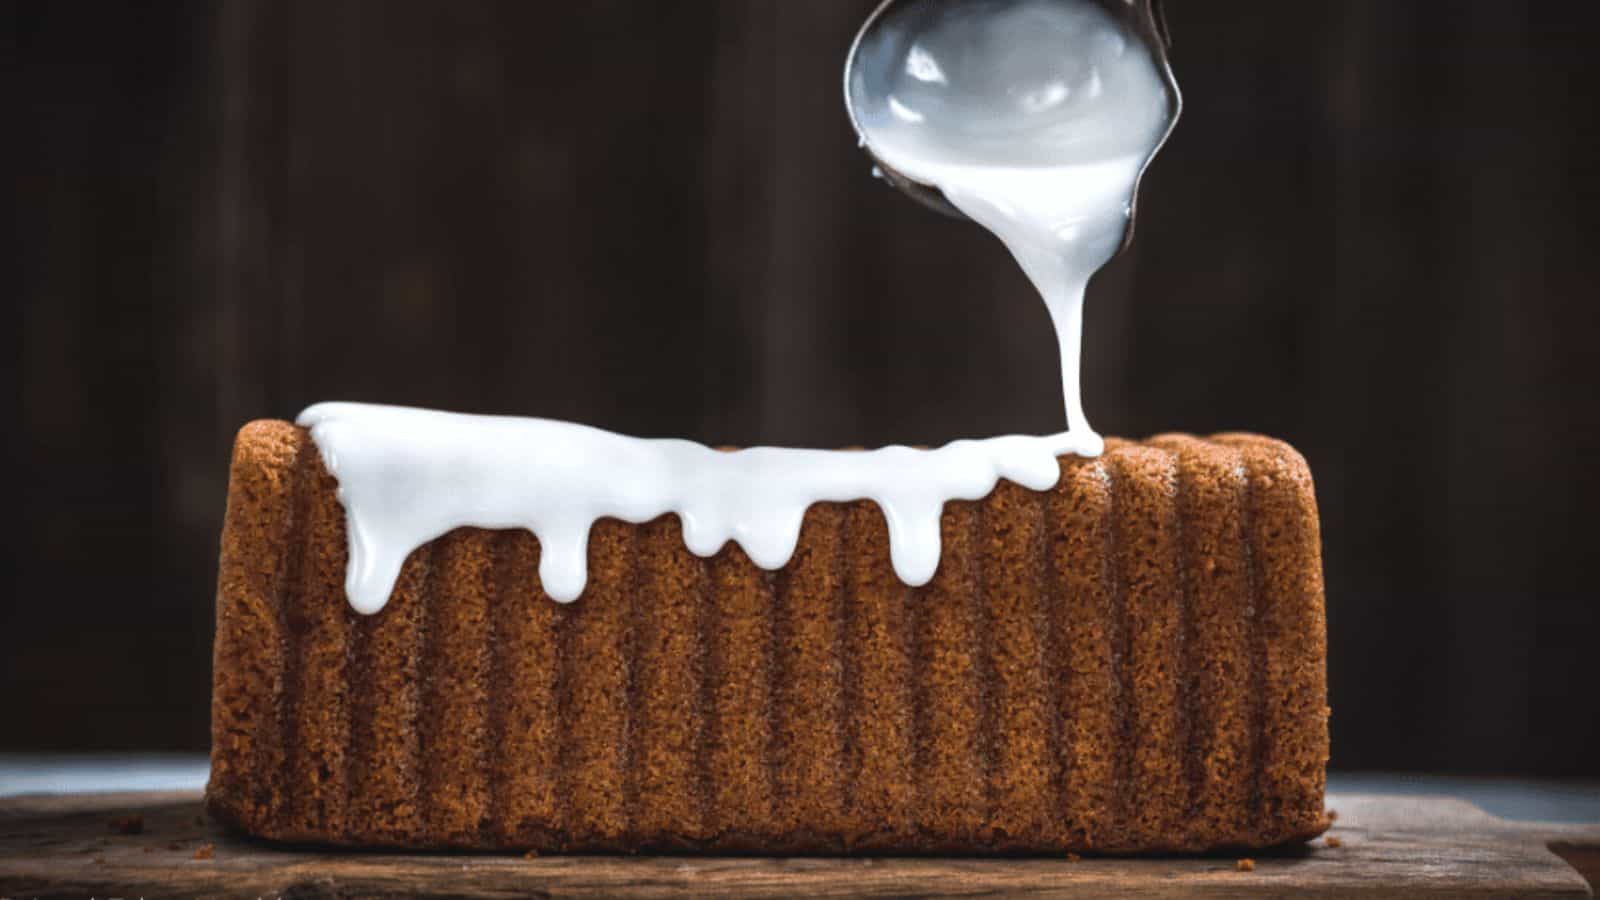 Quick 3-ingredient icing glaze for brownies, cookies, and cakes being poured over loaf of sweet bread.